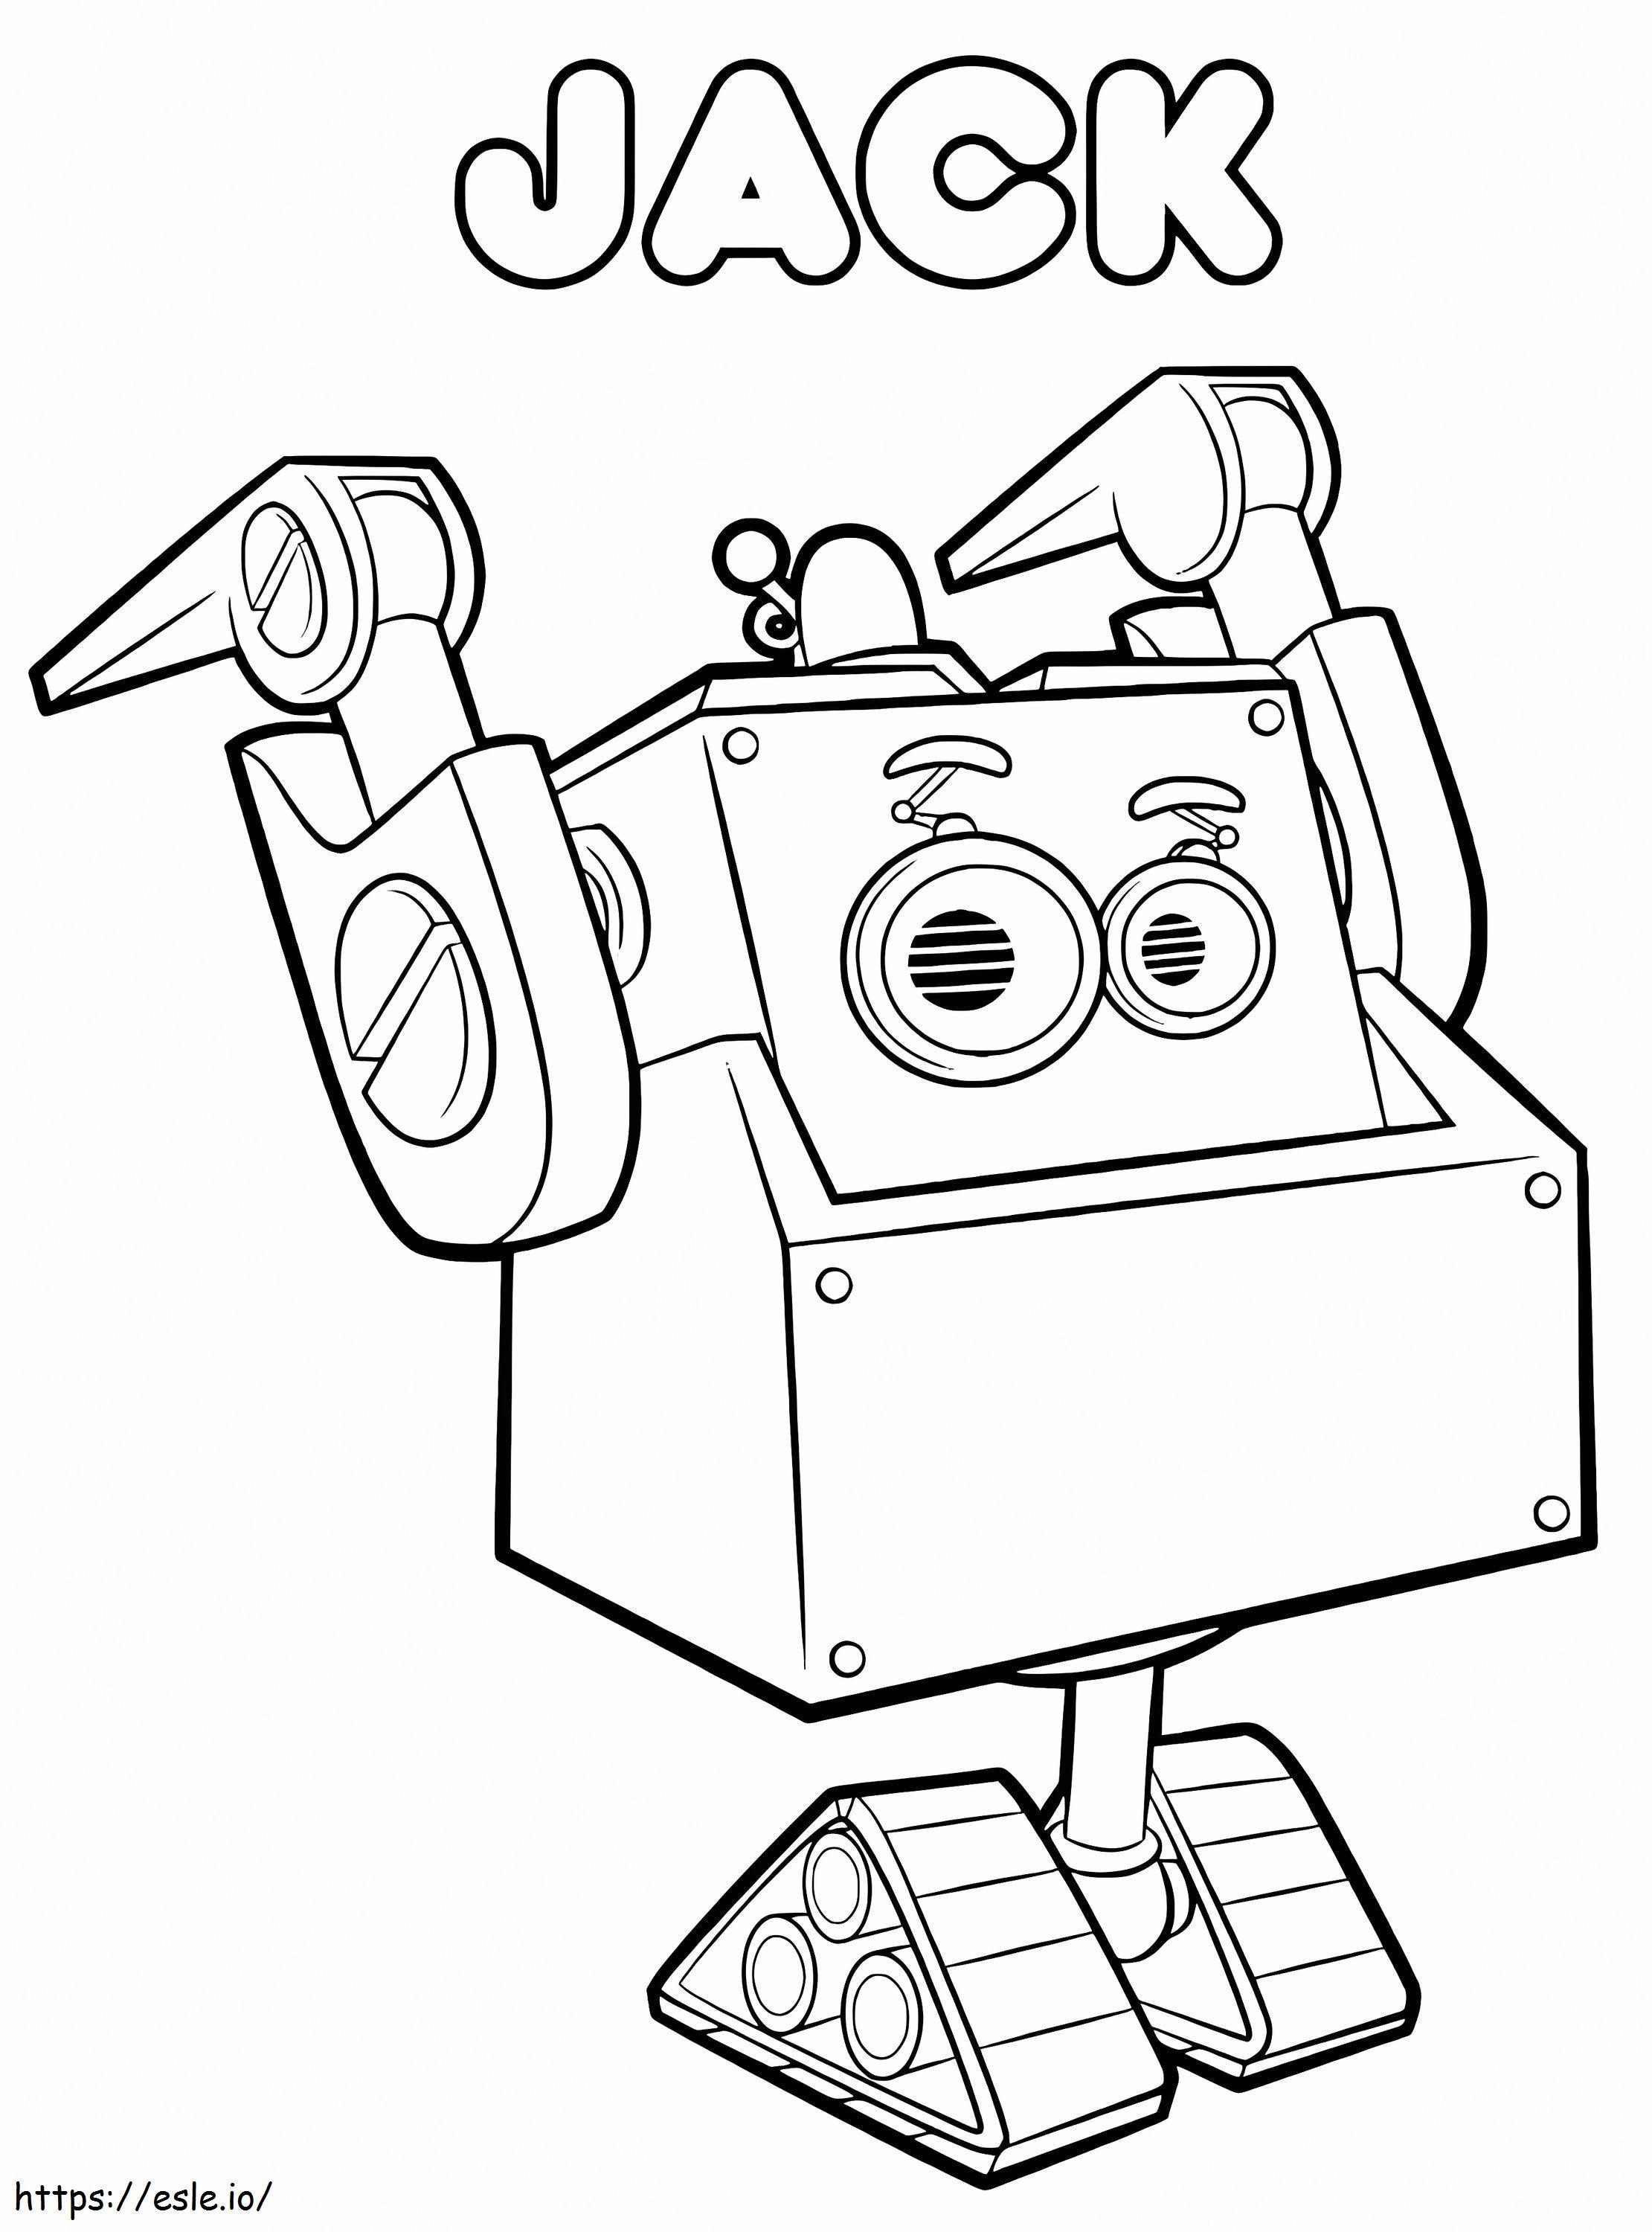 1597191145 Vdsfgesg coloring page